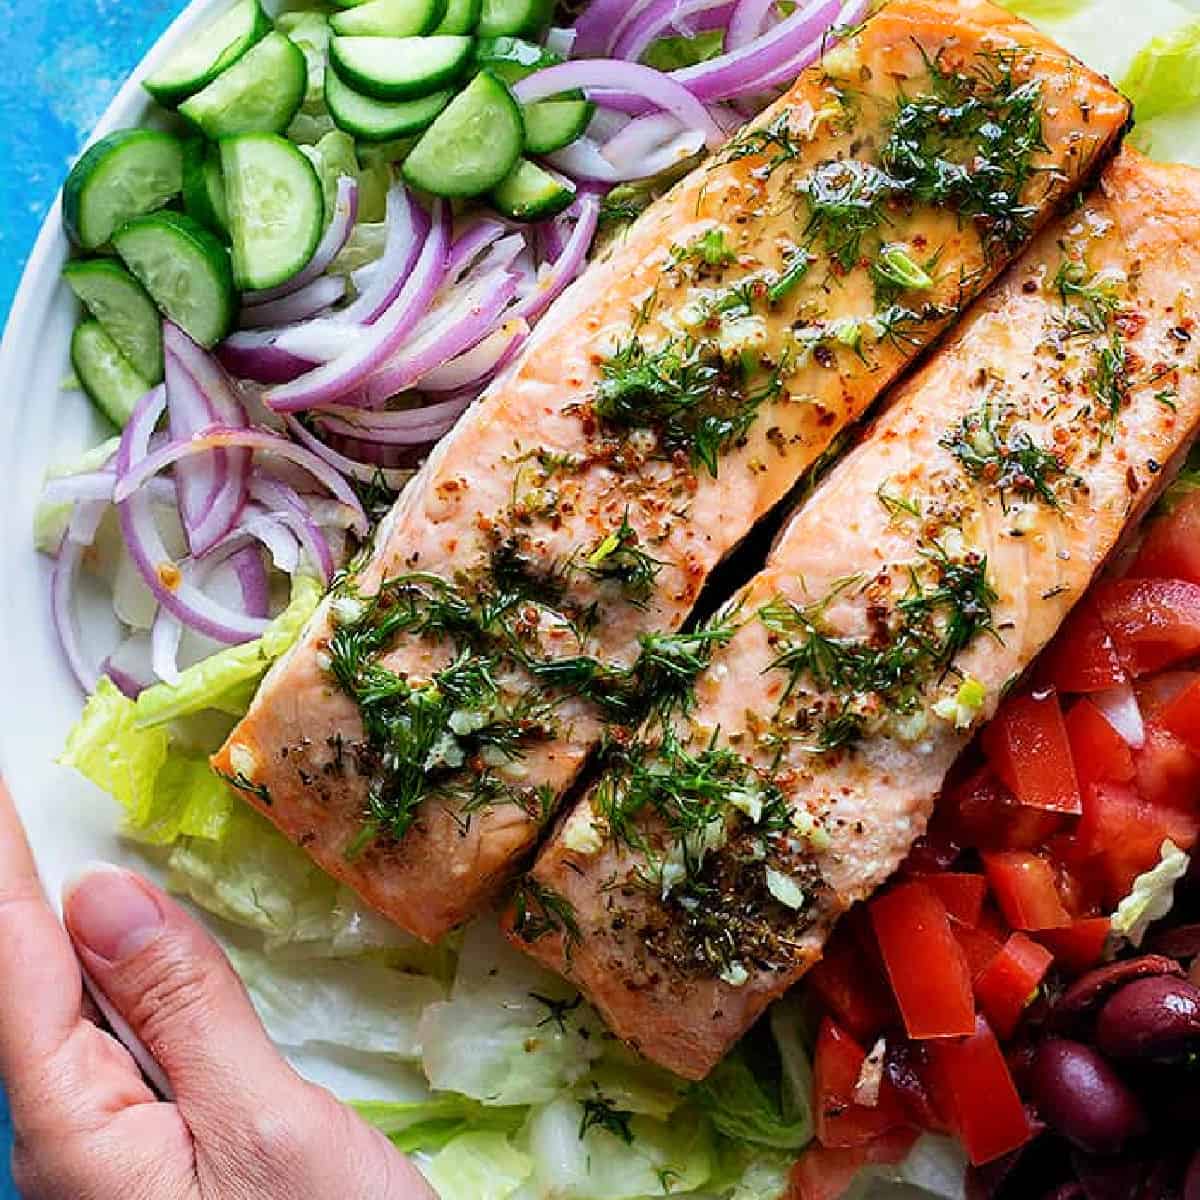 seafood recipes- Ready in 30 minutes, this Greek salmon salad is perfect for lunch or dinner. You only need a few ingredients and some good salmon to make it!
